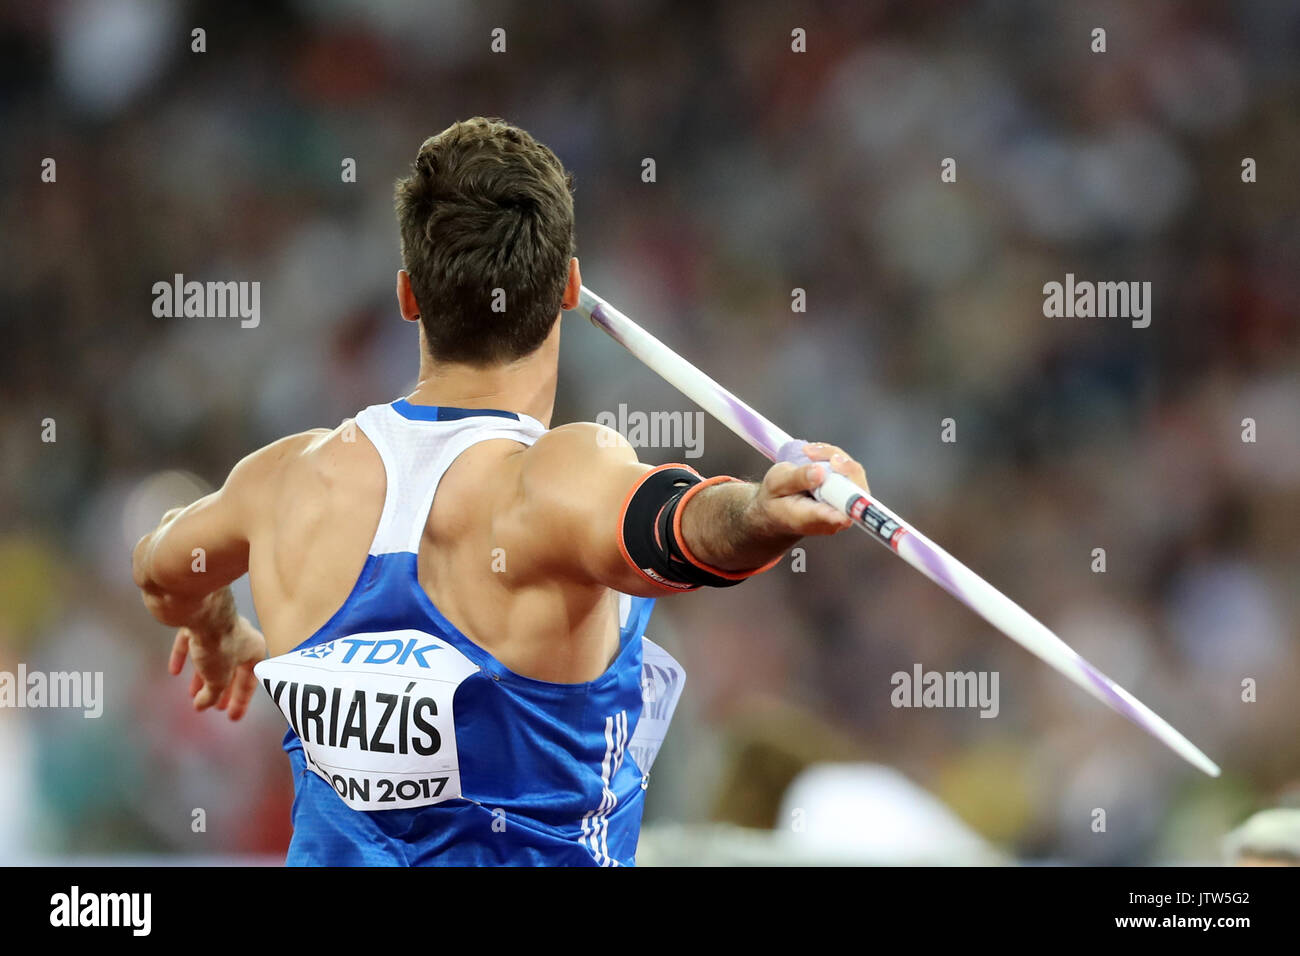 London, UK. 10-Aug-17. Ioánnis KIRIAZÍS (Greece) competing in the Javelin Throw Qualification Group B at the 2017 IAAF World Championships, Queen Elizabeth Olympic Park, Stratford, London, UK. Credit: Simon Balson/Alamy Live News Stock Photo